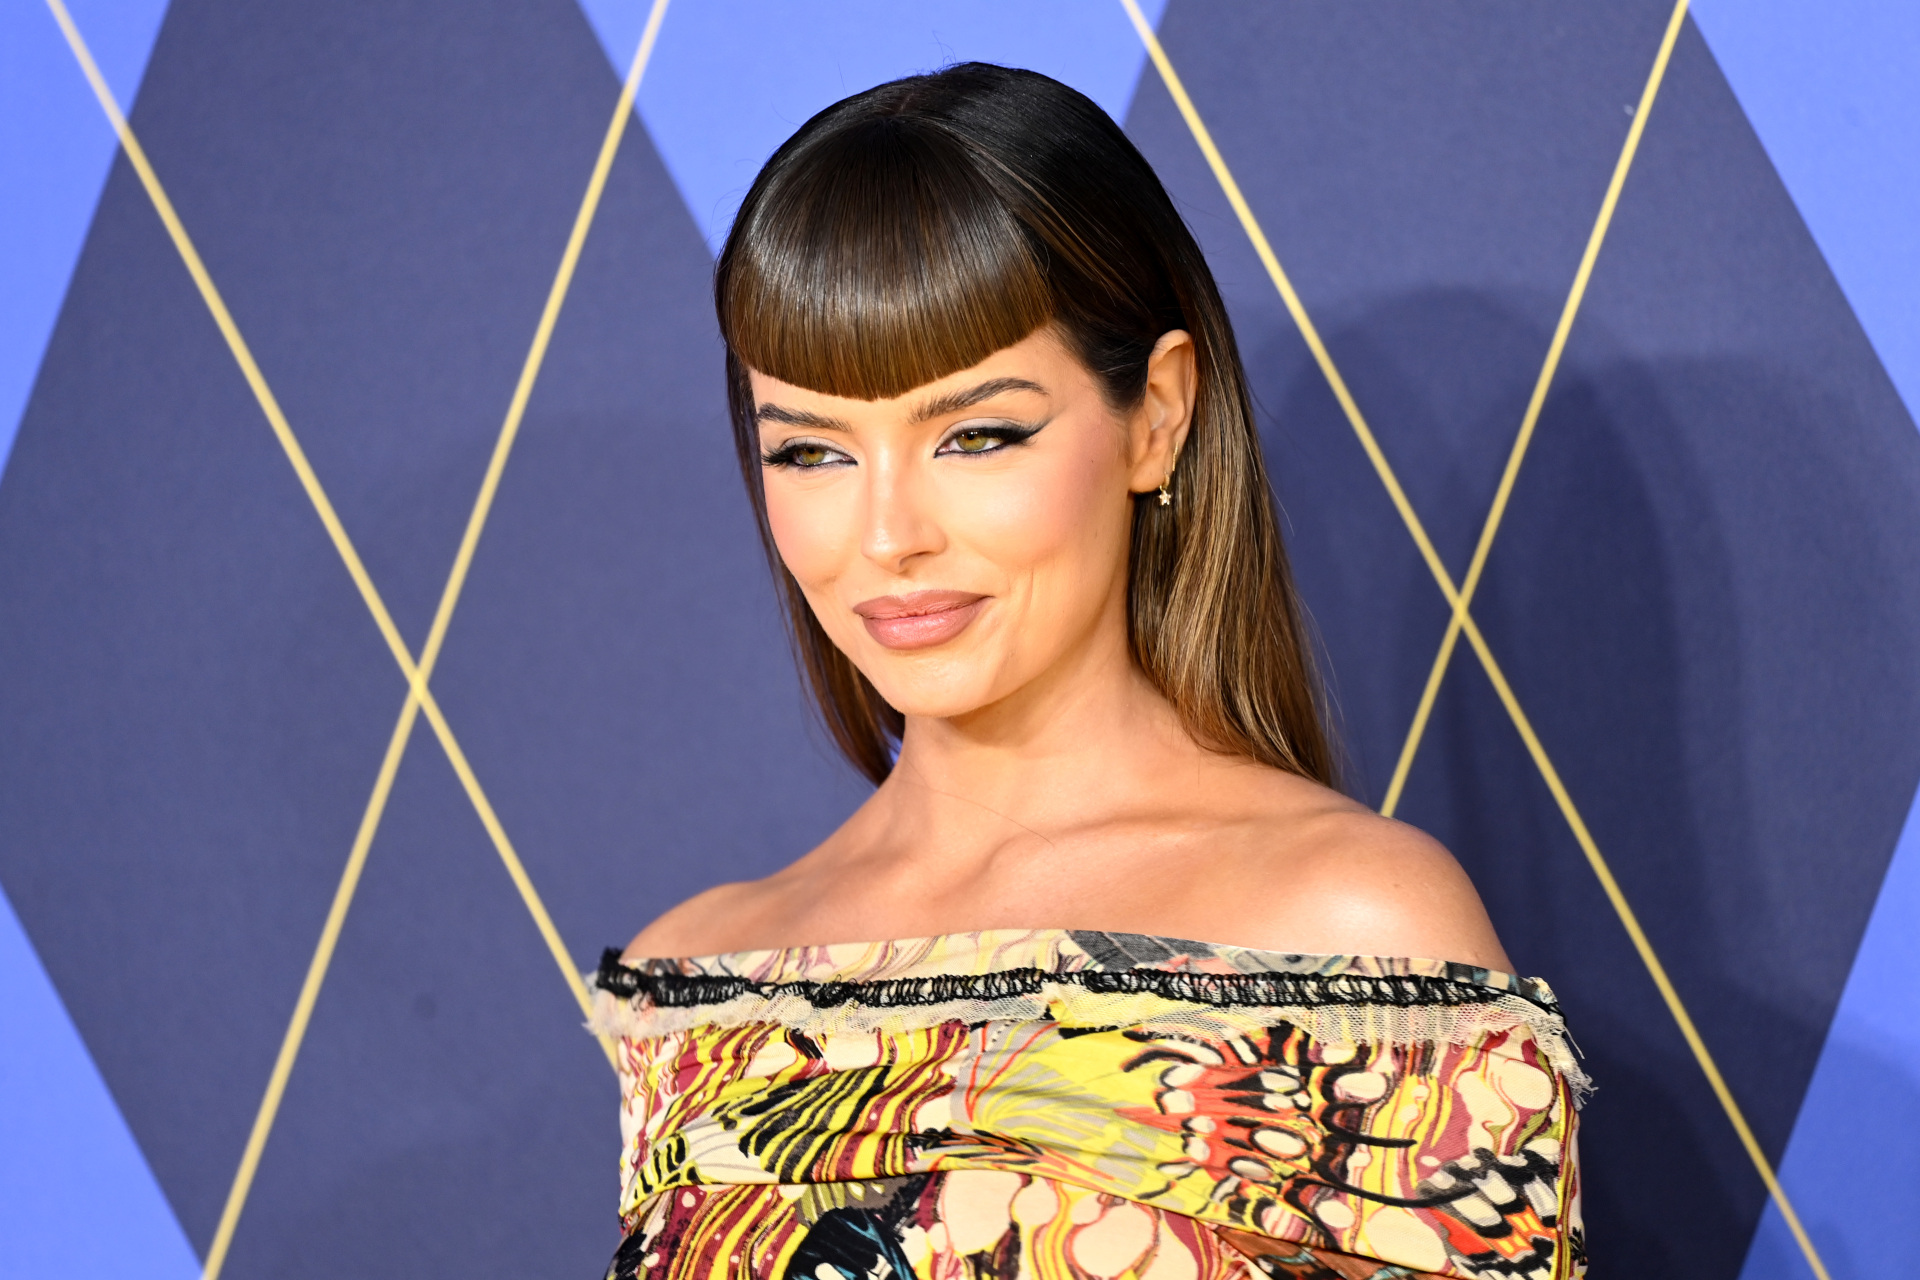 Are Gothic Triangle Bangs The Next Celeb-Approved Hairstyle?